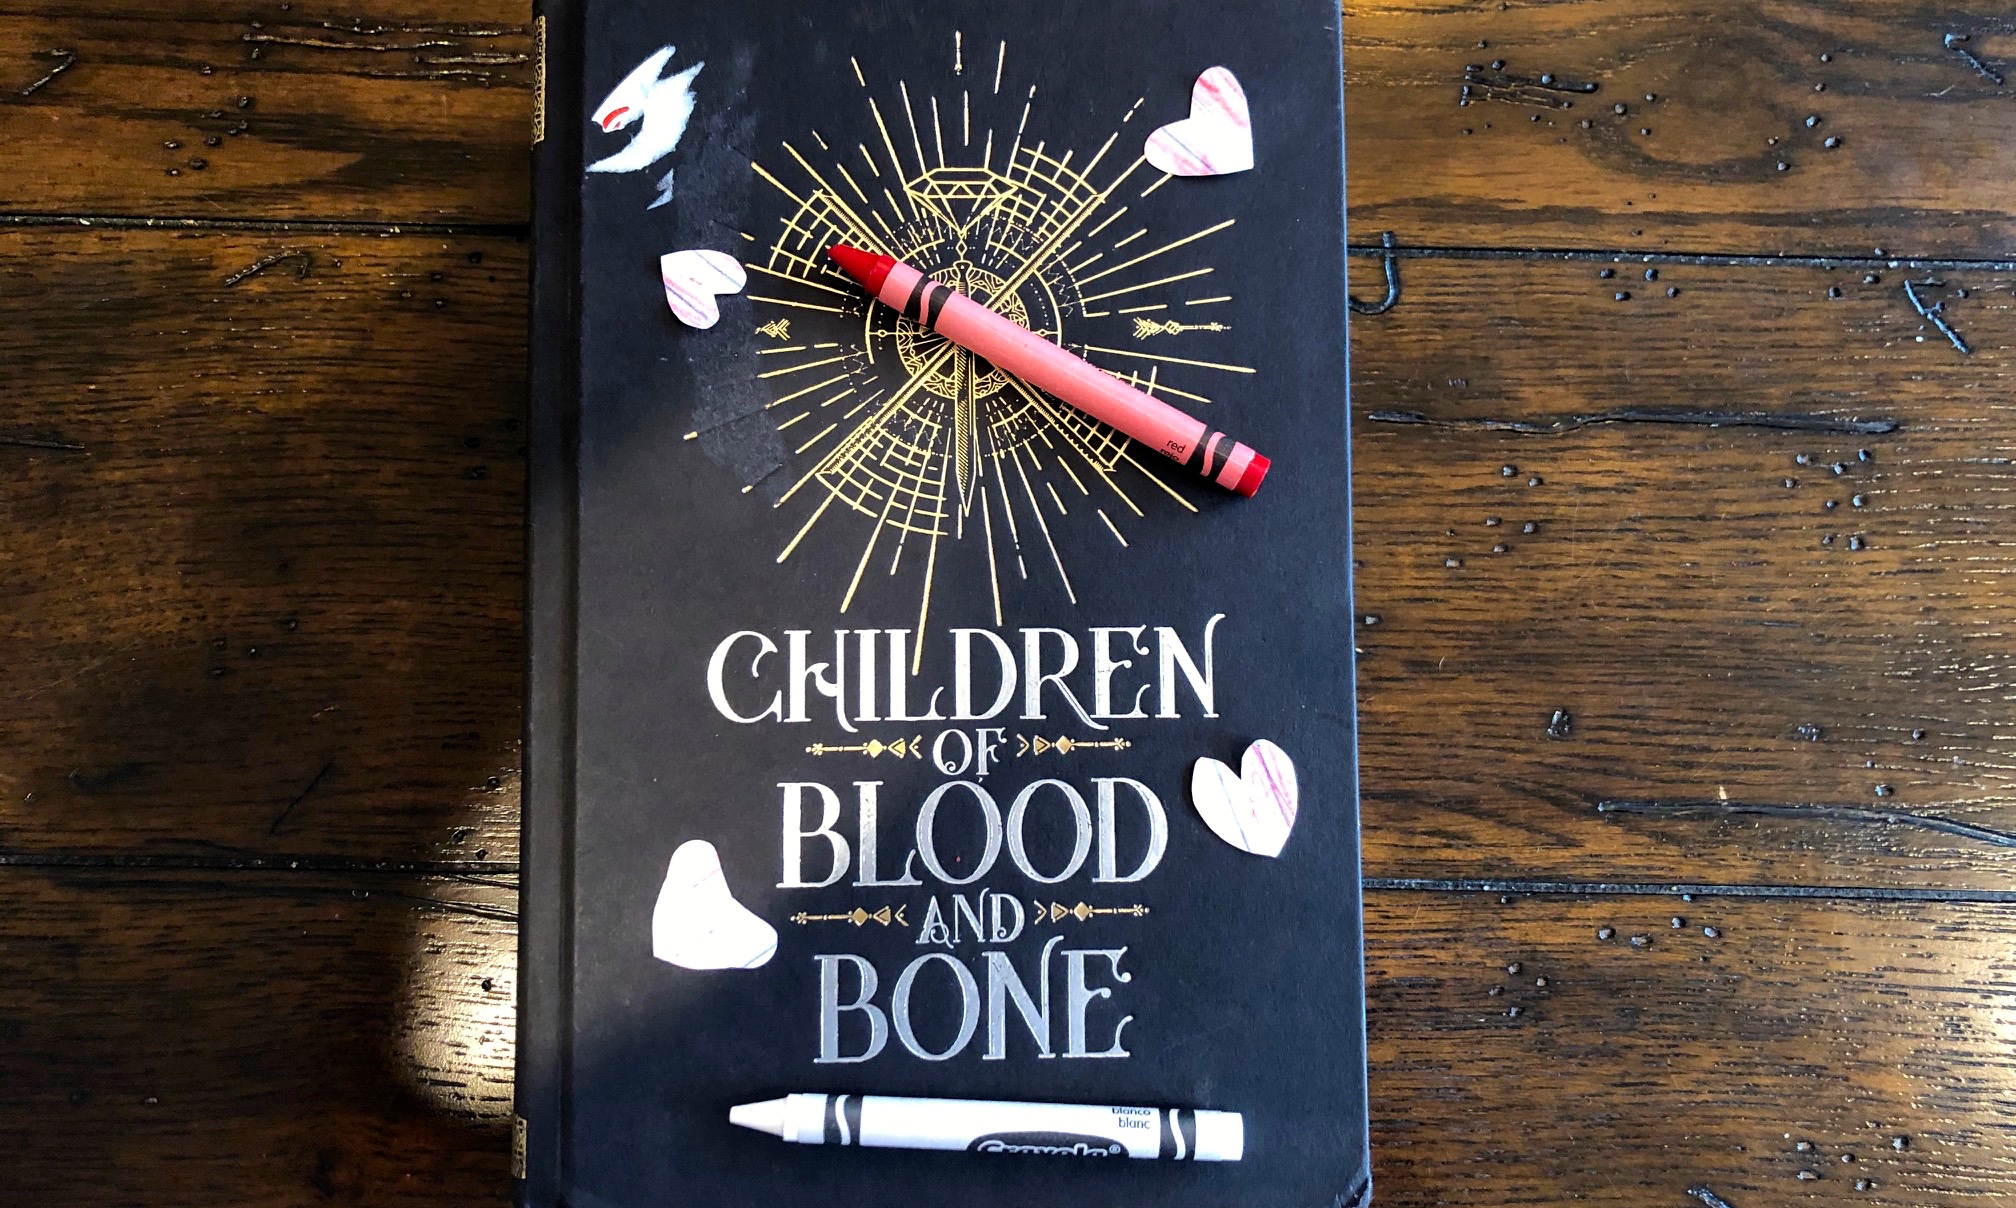 Children of Blood and Bone by Tomi Adeyemi